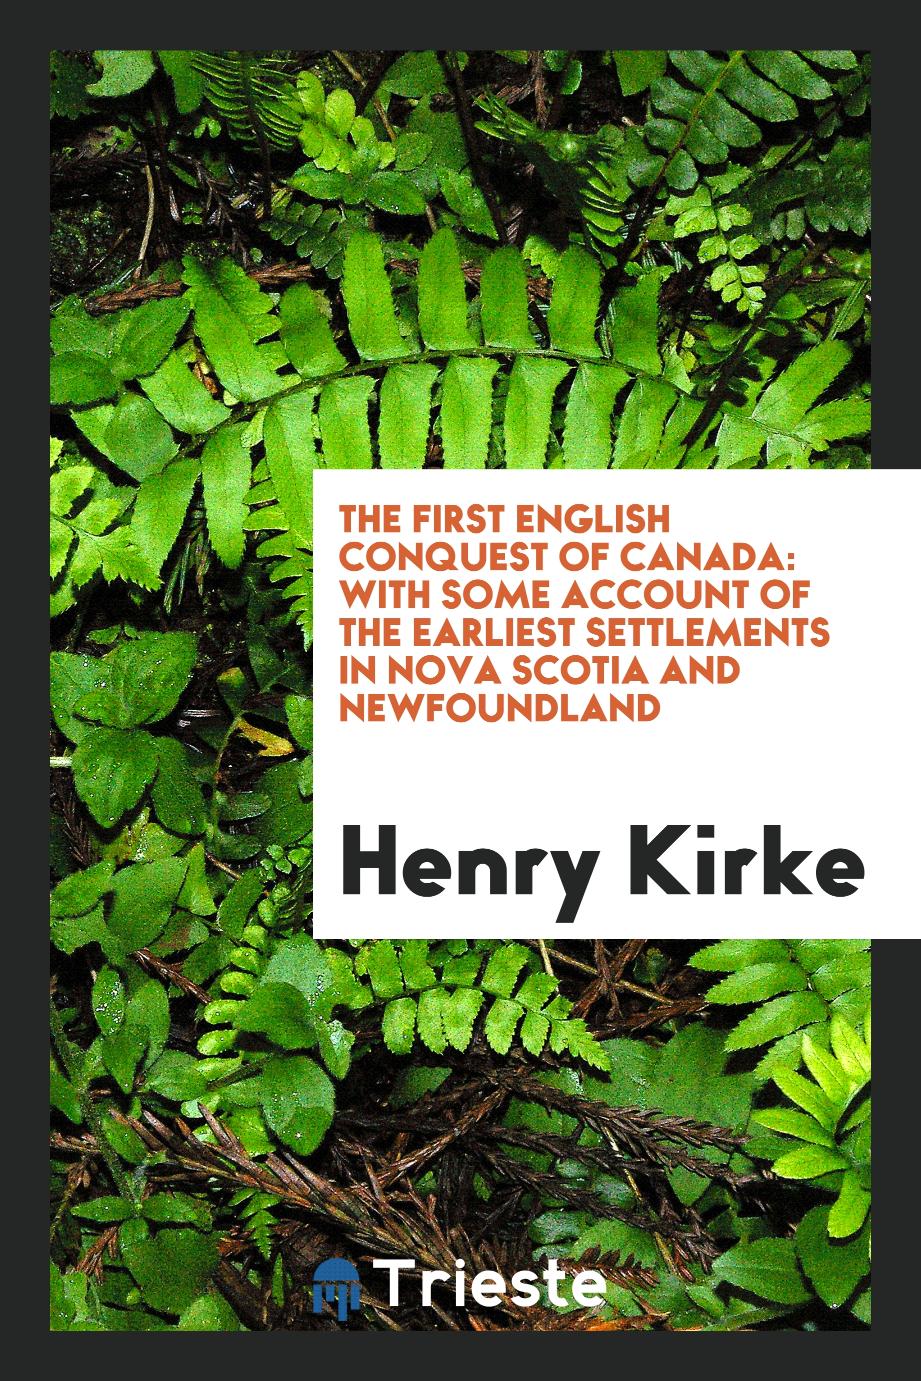 The First English Conquest of Canada: With Some Account of the Earliest Settlements in Nova Scotia and Newfoundland